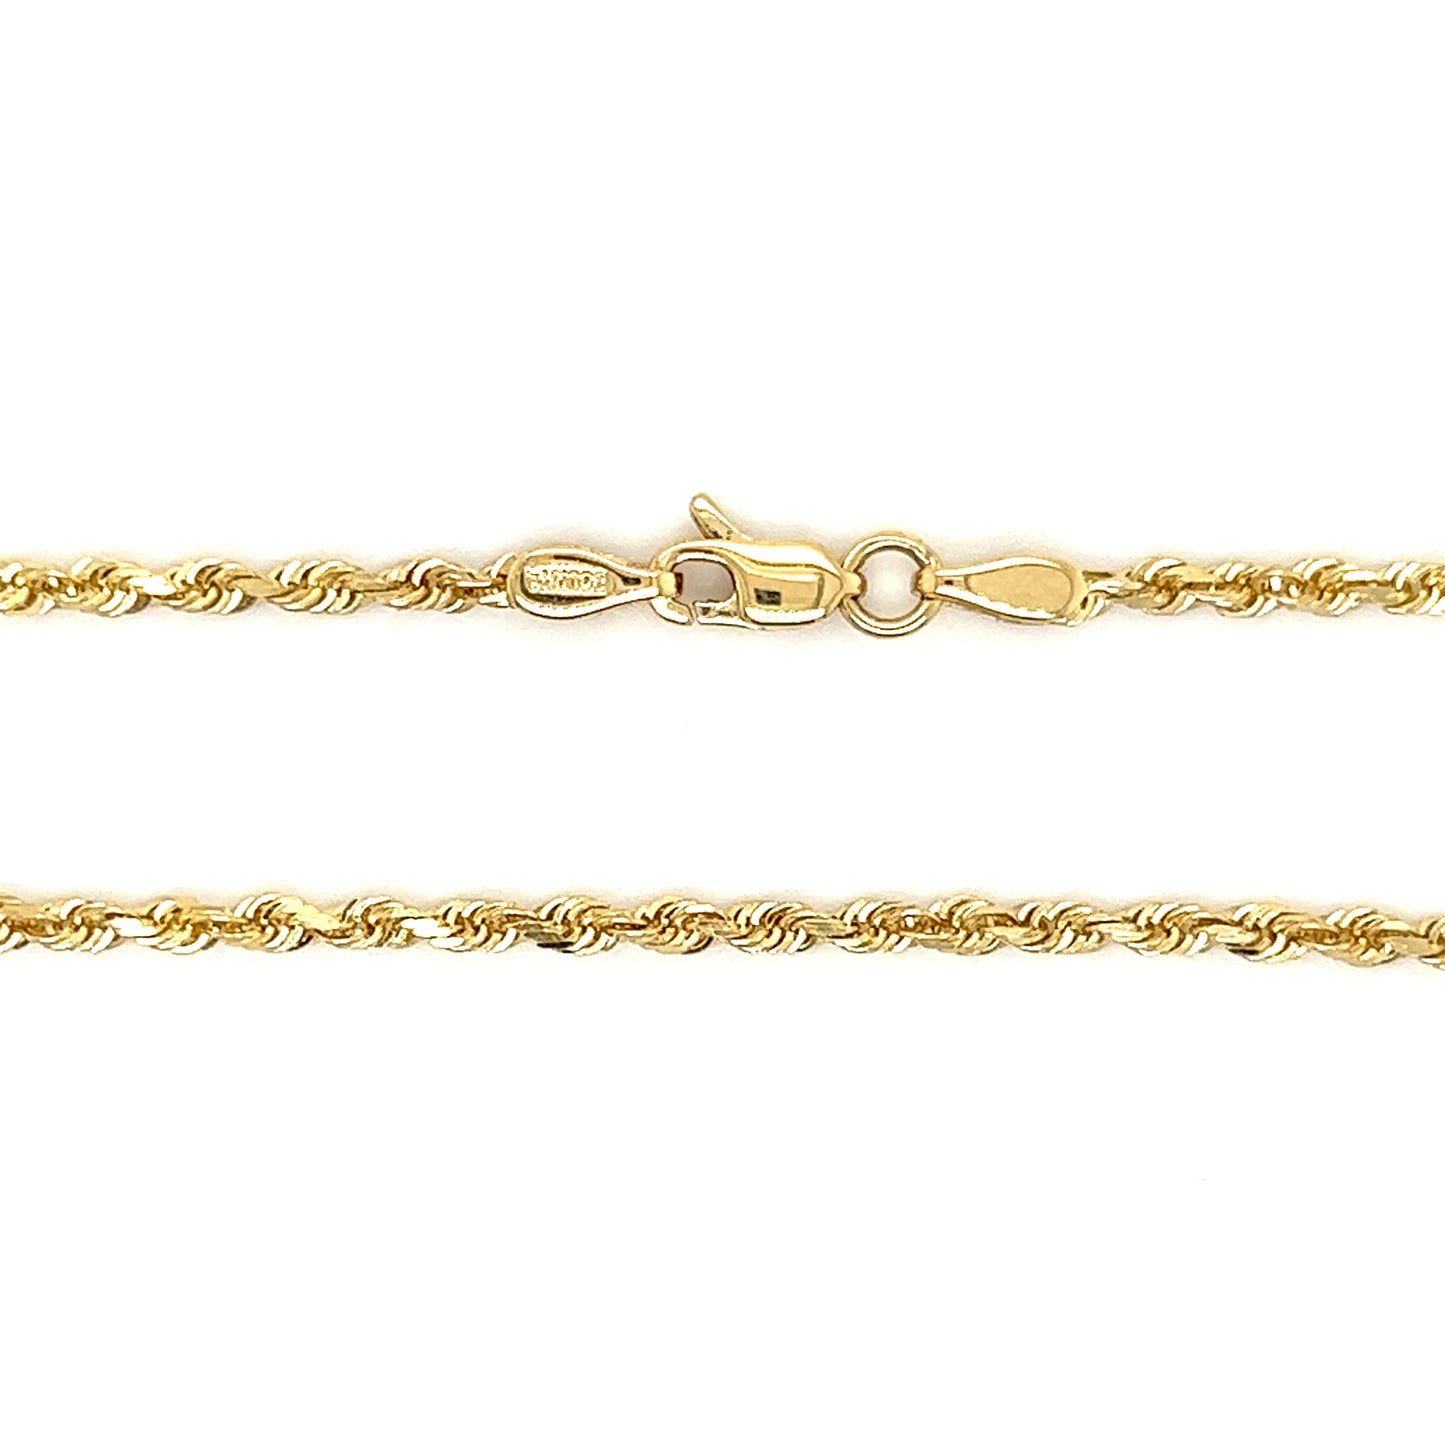 Rope Chain 2.15mm with 20in Length in 10K Yellow Gold Chain and Clasp View